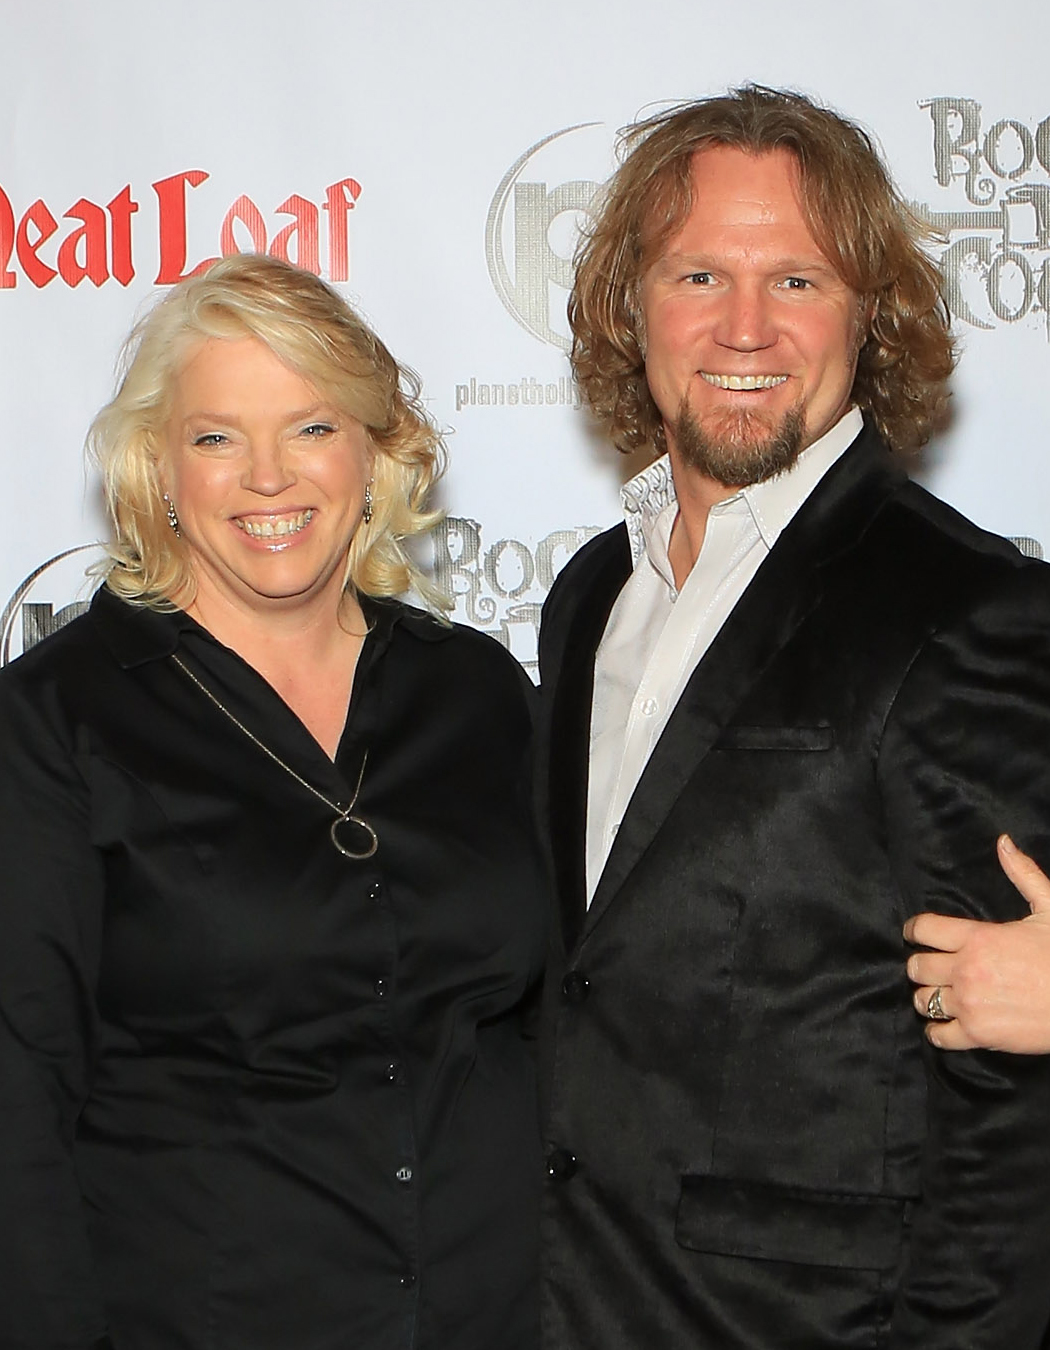 <p>In March 2024, "Sister Wives" stars Janelle Brown and Kody Brown said goodbye to 25-year-old son Garrison — one of the six children they welcomed during their lengthy plural marriage, which ended in 2022. According to authorities in Flagstaff, Arizona, where Garrison lived, he died from an apparent suicide, People magazine reported. </p><p>"Kody and I are deeply saddened to announce the loss of our beautiful boy Robert Garrison Brown. He was a bright spot in the lives of all who knew him. His loss will leave such a big hole in our lives that it takes our breath away. We ask that you please respect our privacy and join us in honoring his memory," the former couple wrote on Instagram, confirming their heartbreak.</p><p><em>If you or someone you know is considering suicide or in crisis, call <a href="https://988lifeline.org/current-events/the-lifeline-and-988/" rel="noreferrer noopener">The National Suicide Prevention Lifeline at 988</a> for support.</em></p><p><em><em>Keep reading for more stars who've had to mourn their kids...</em></em></p><p>MORE: <a href="https://www.wonderwall.com/celebrity/stars-who-died-coronavirus-covid-19-3022682.gallery">Stars who've died from COVID-19</a></p>